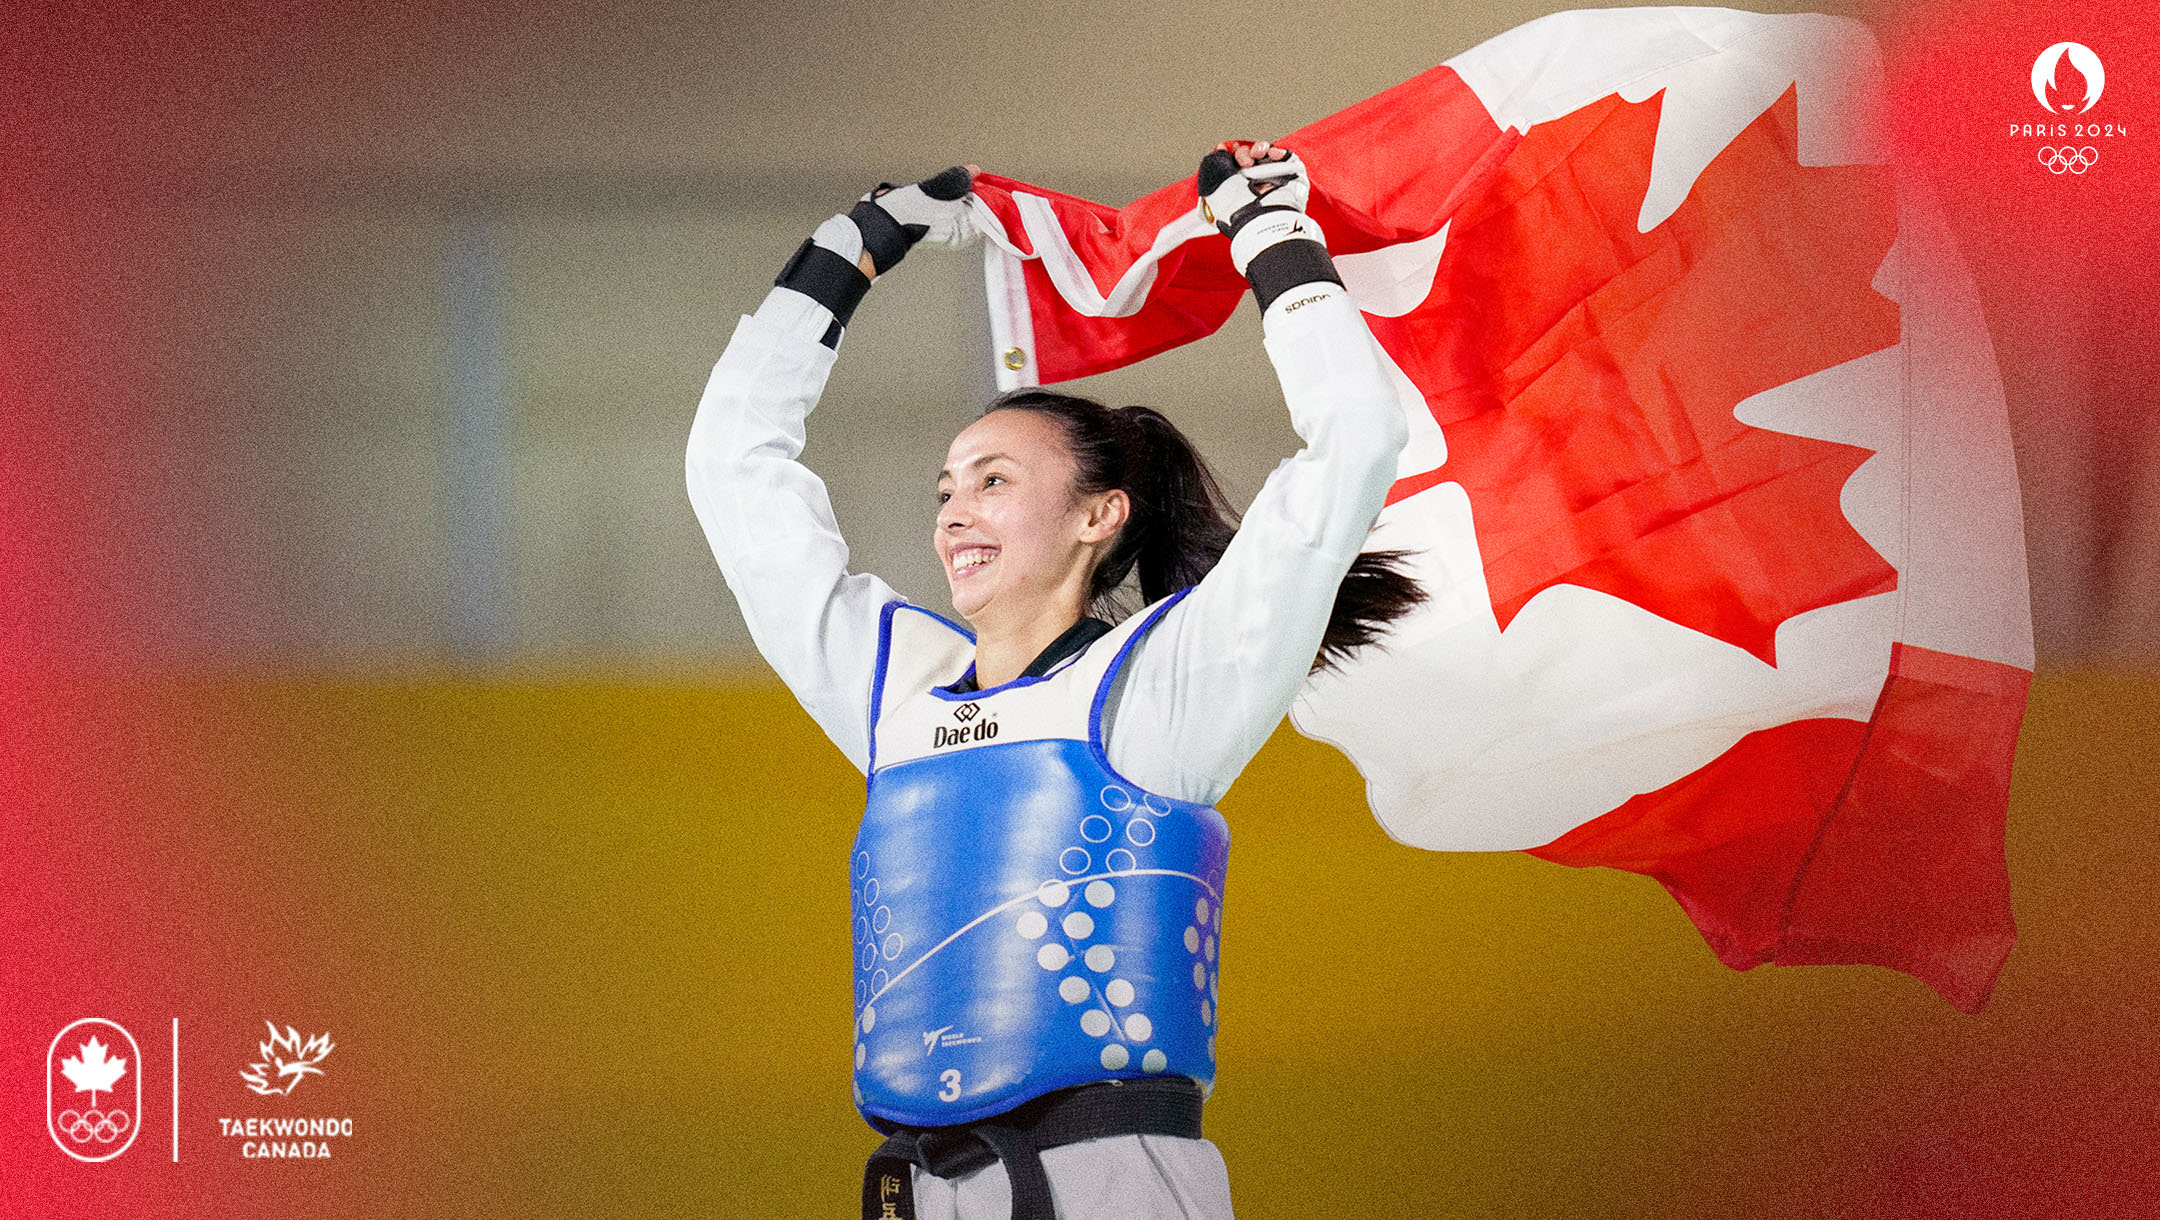 Taekwondo is first team named to the Paris 2024 Canadian Olympic Team